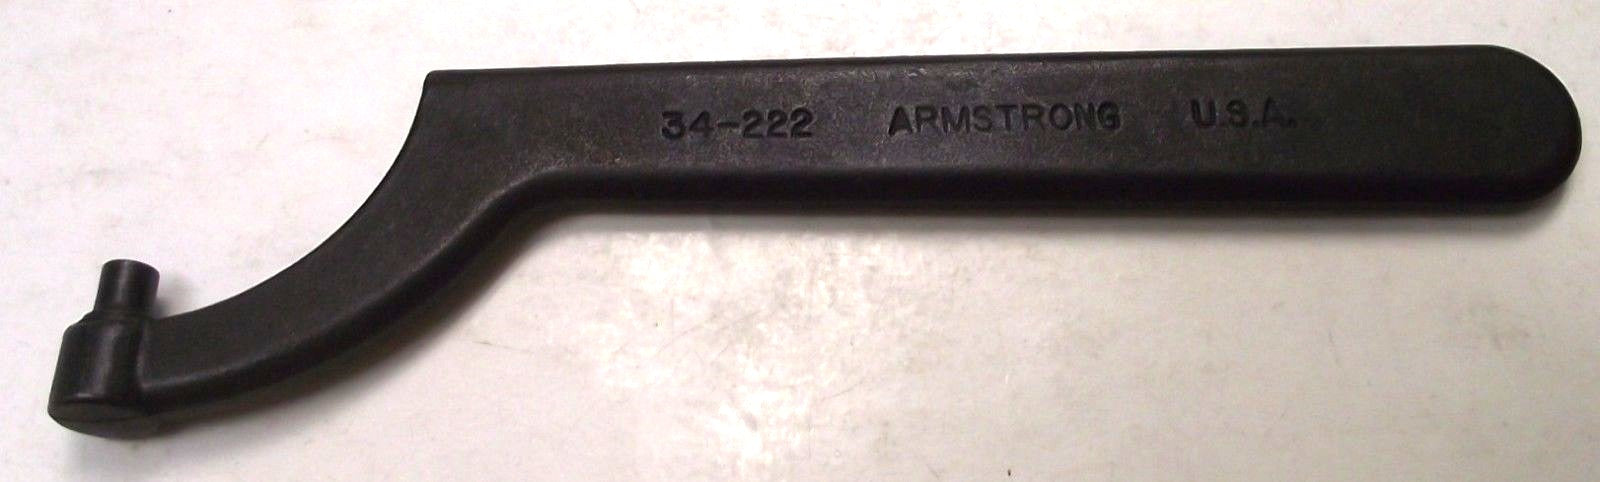 Armstrong 34-222 2-3/4" Pin Spanner Wrench USA